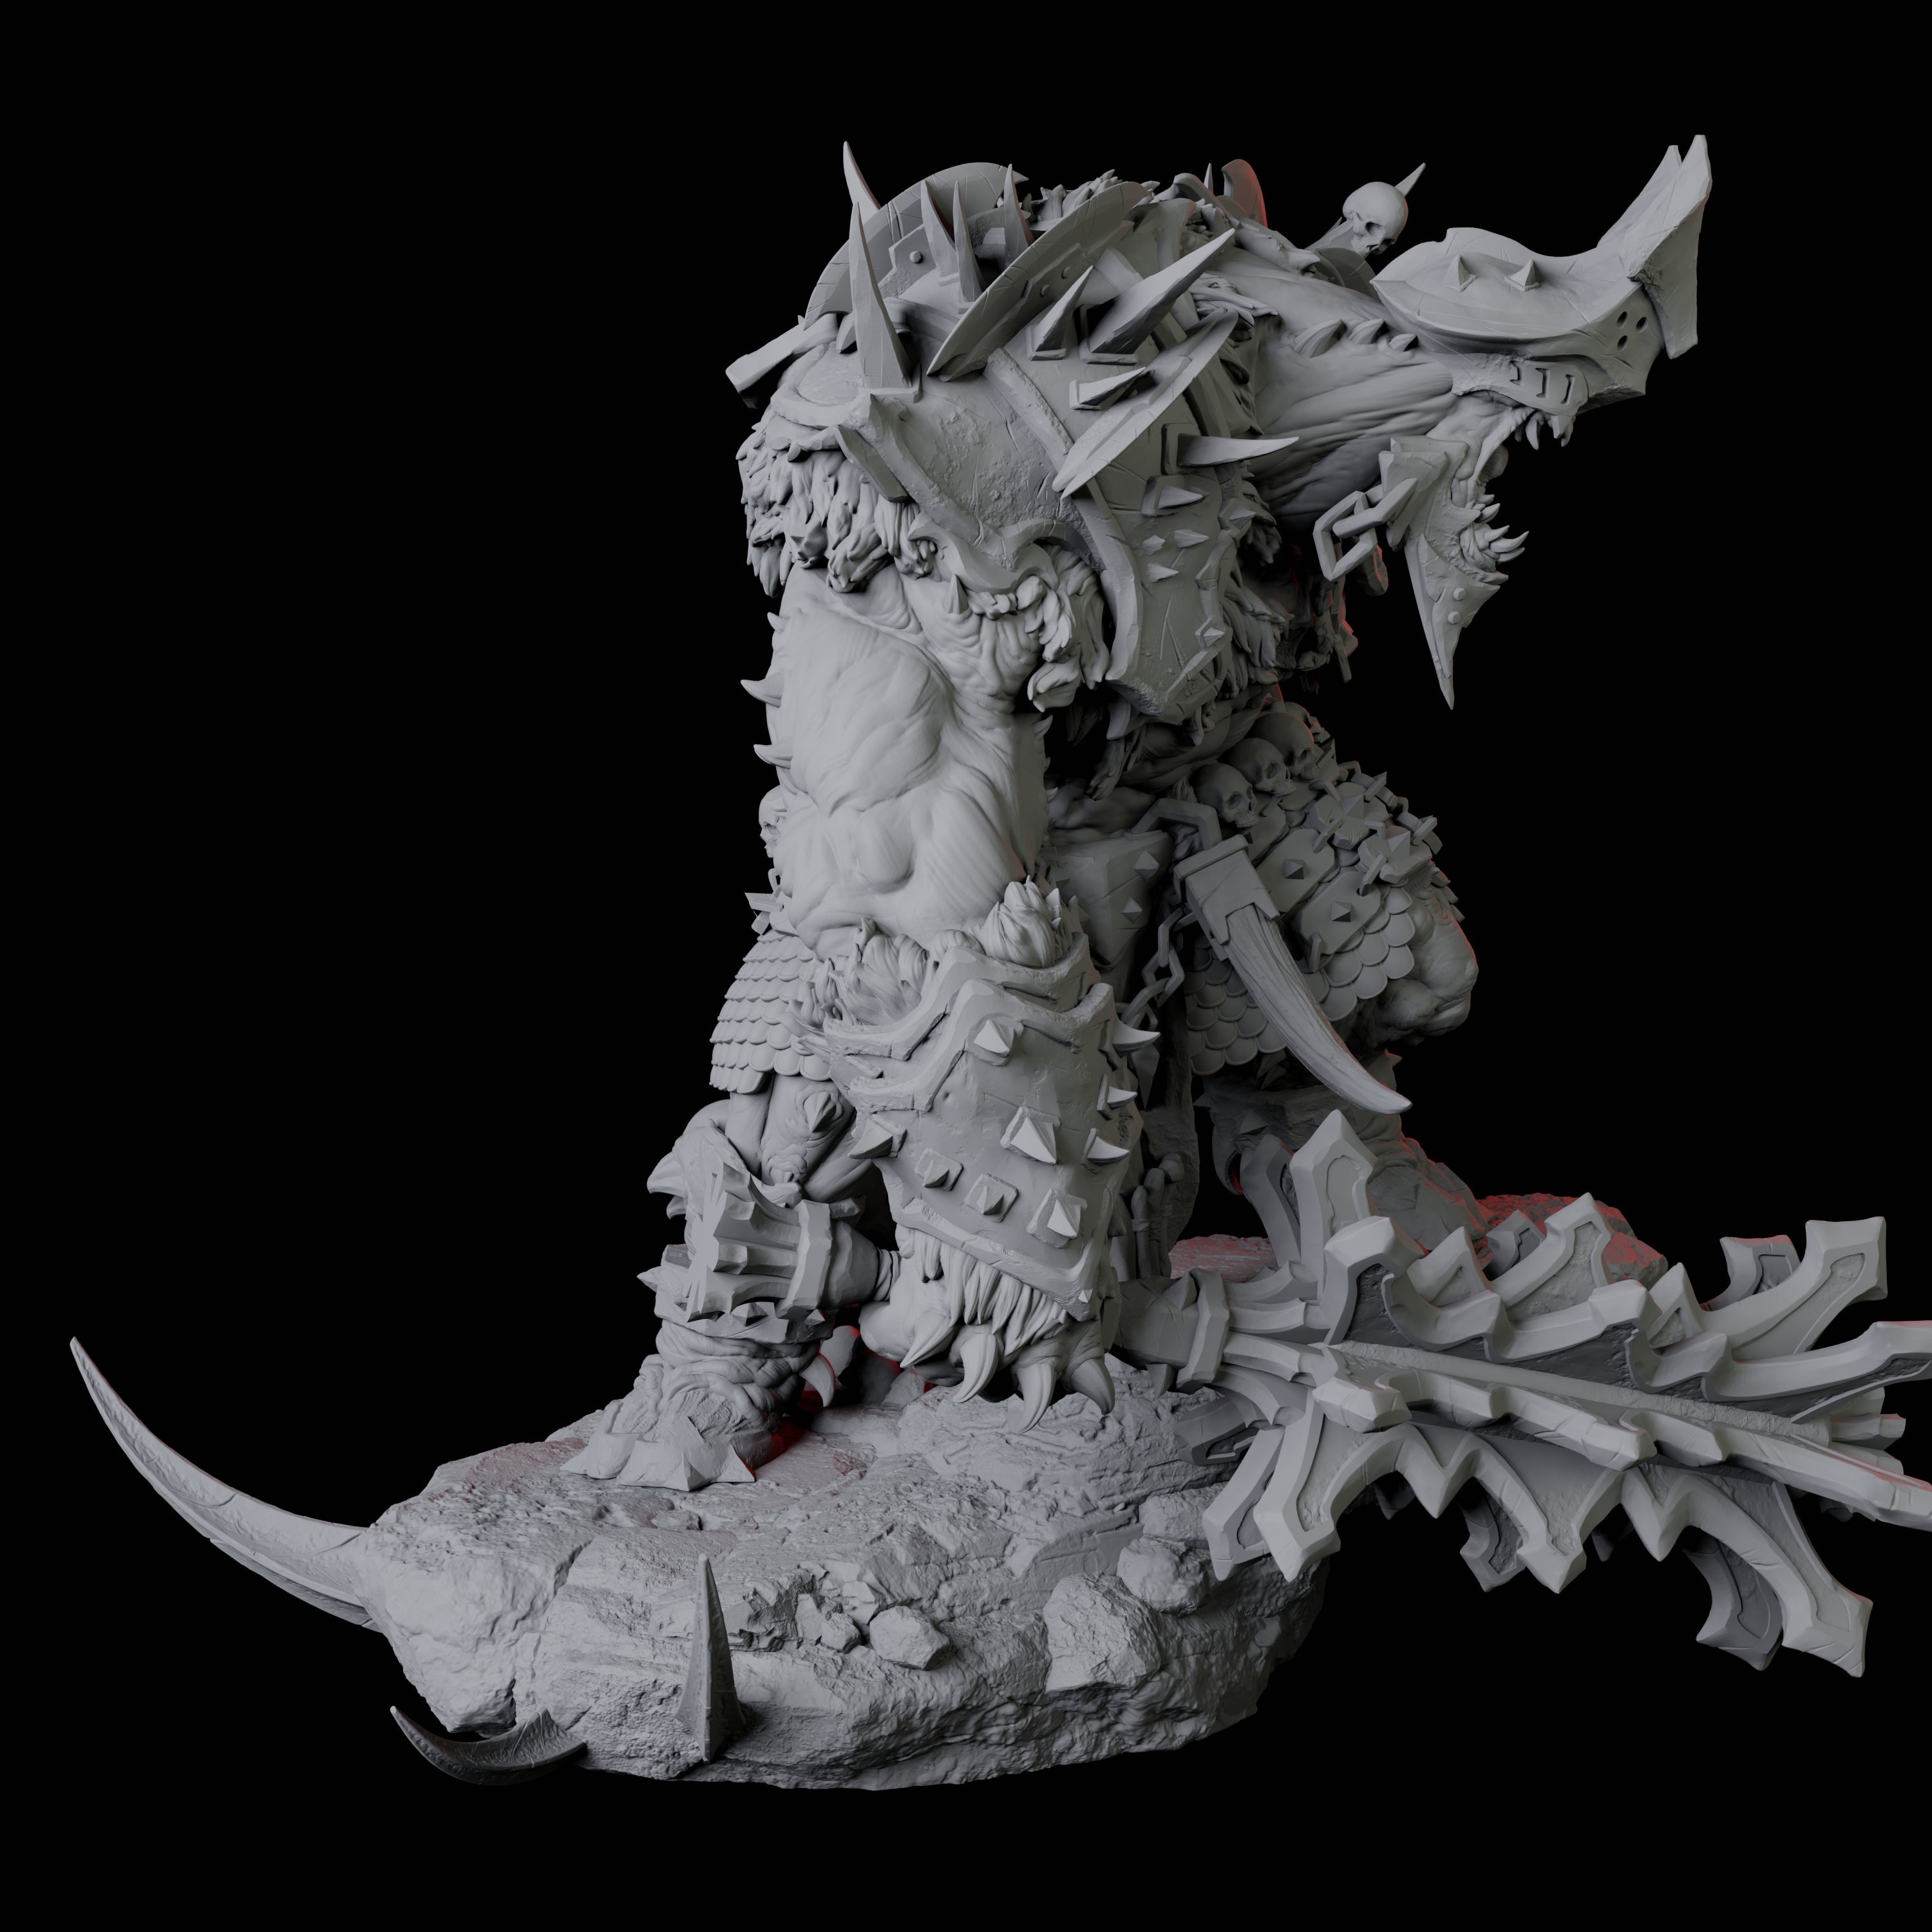 Charging Slaver Demon C Miniature for Dungeons and Dragons, Pathfinder or other TTRPGs